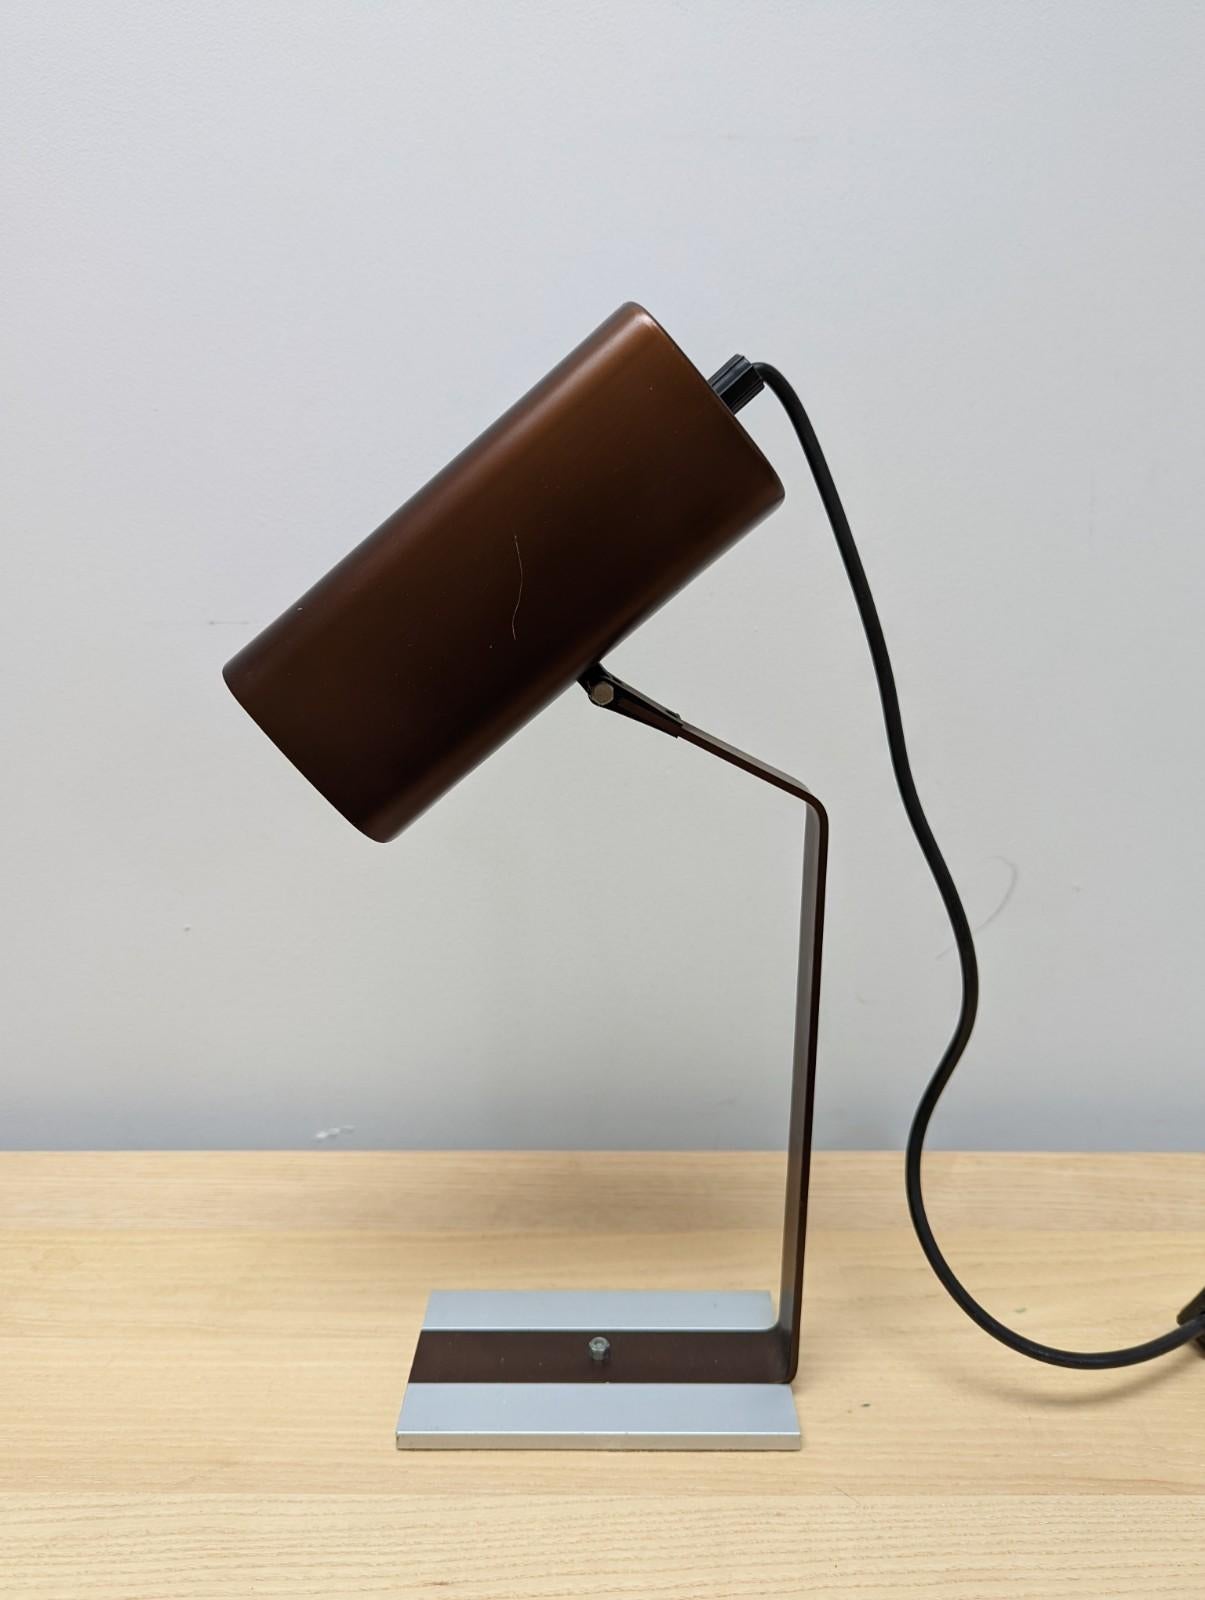 A stunning Italian mid-century desk lamp.

The lamps manufacturer is unknown but labelled underneath as 'made in Italy'
 
The colour of the lamp is superb brown with a contrasting silver base

Condition - the lamp is in in very good apart from